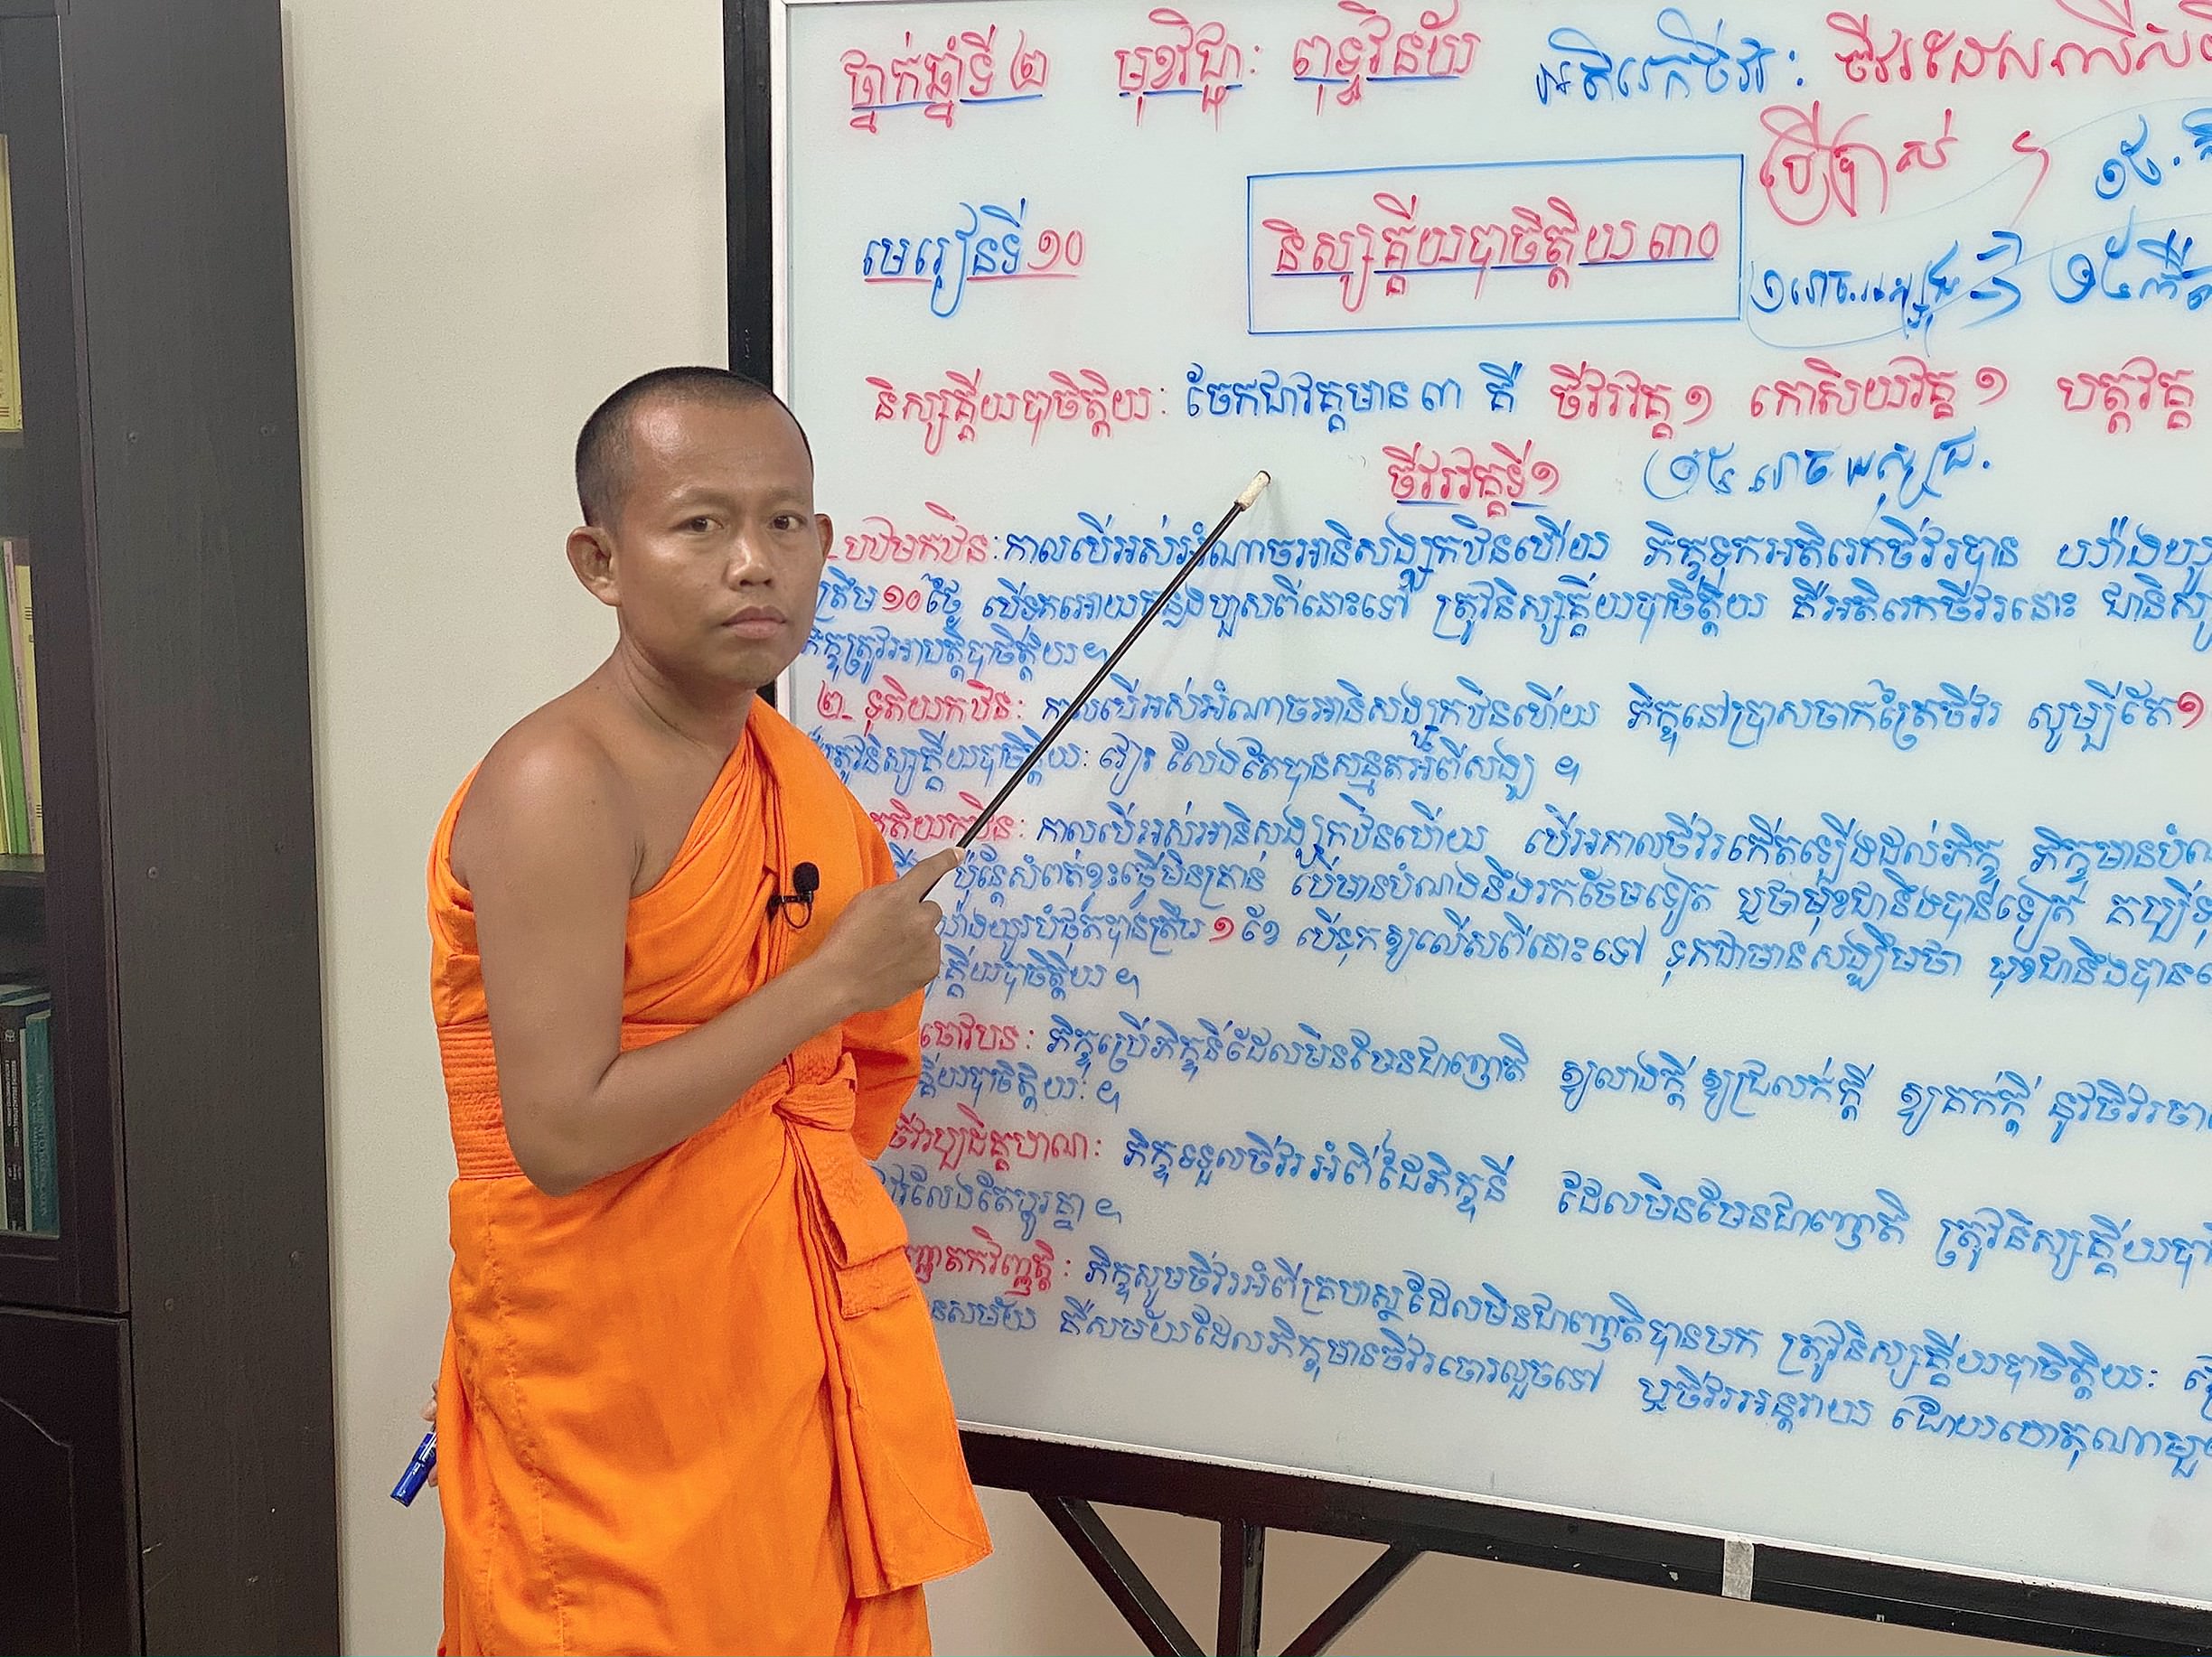 This photo taken in June 2020 shows Ven. Phearum Sok remotely teaching the Vinaya (a set of rules for the monastic community) to the 2nd grade during the pandemic from Varin Prek Leab monastery, Phnom Penh, Cambodia. Photo provided by Ven. Phearum Sok and taken by Ven. Bayon Sok.